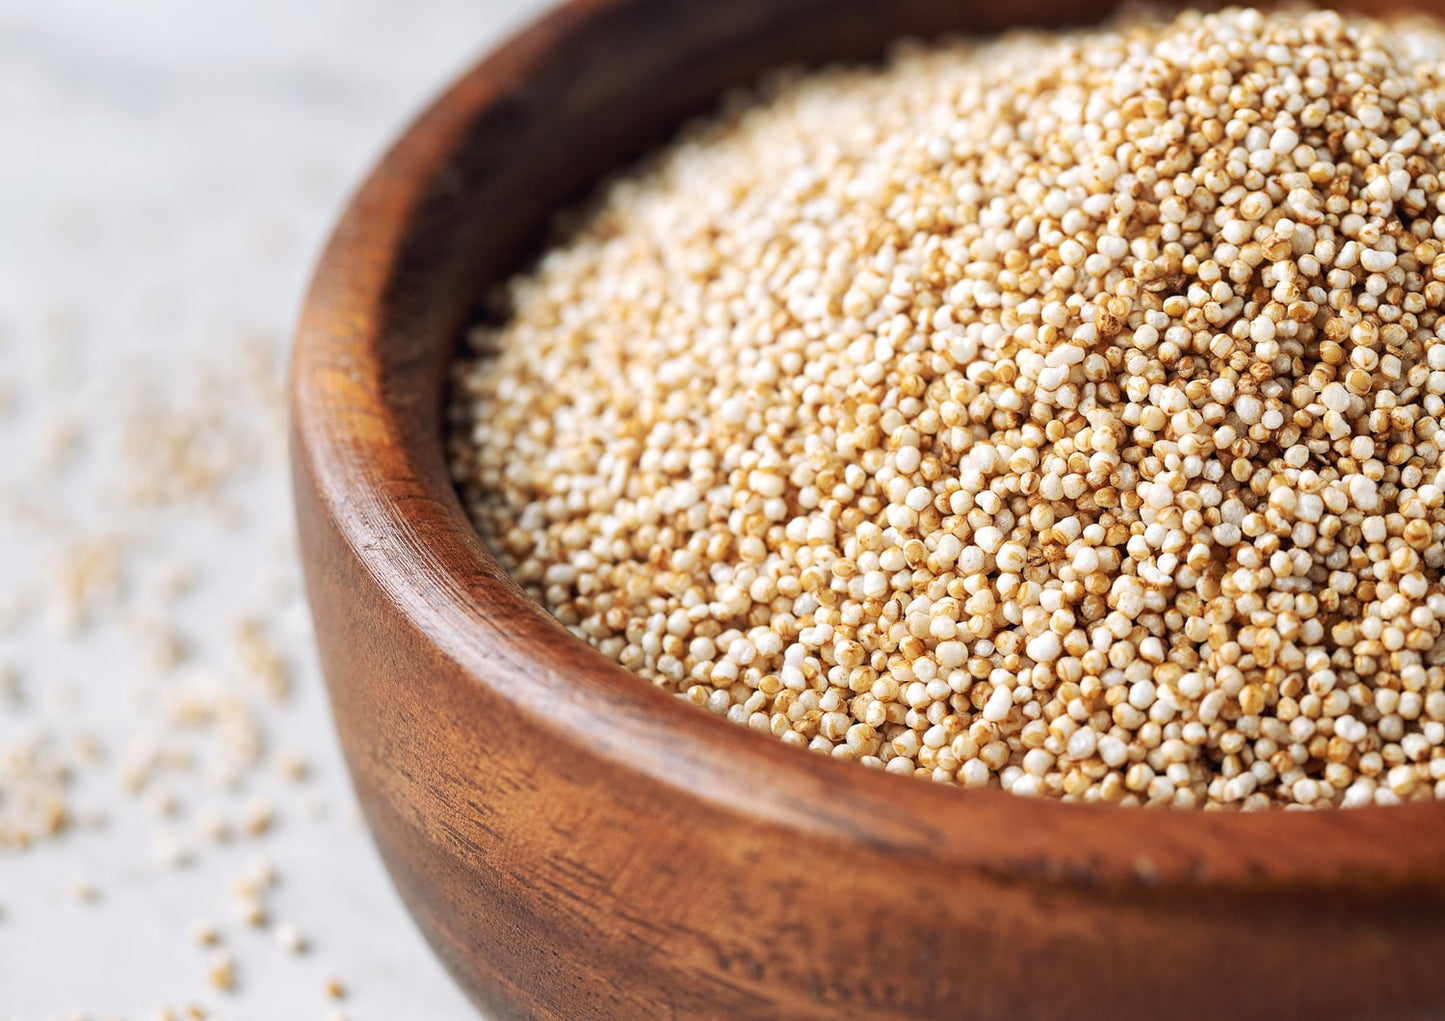 Organic Popped Amaranth – Non-GMO Puffed Seeds, No Sugar Added, Vegan, Bulk Grain. Good Source of Protein. Great Pop Snack. Perfect as Topping for Breakfast Cereal, Porridge, Yogurt